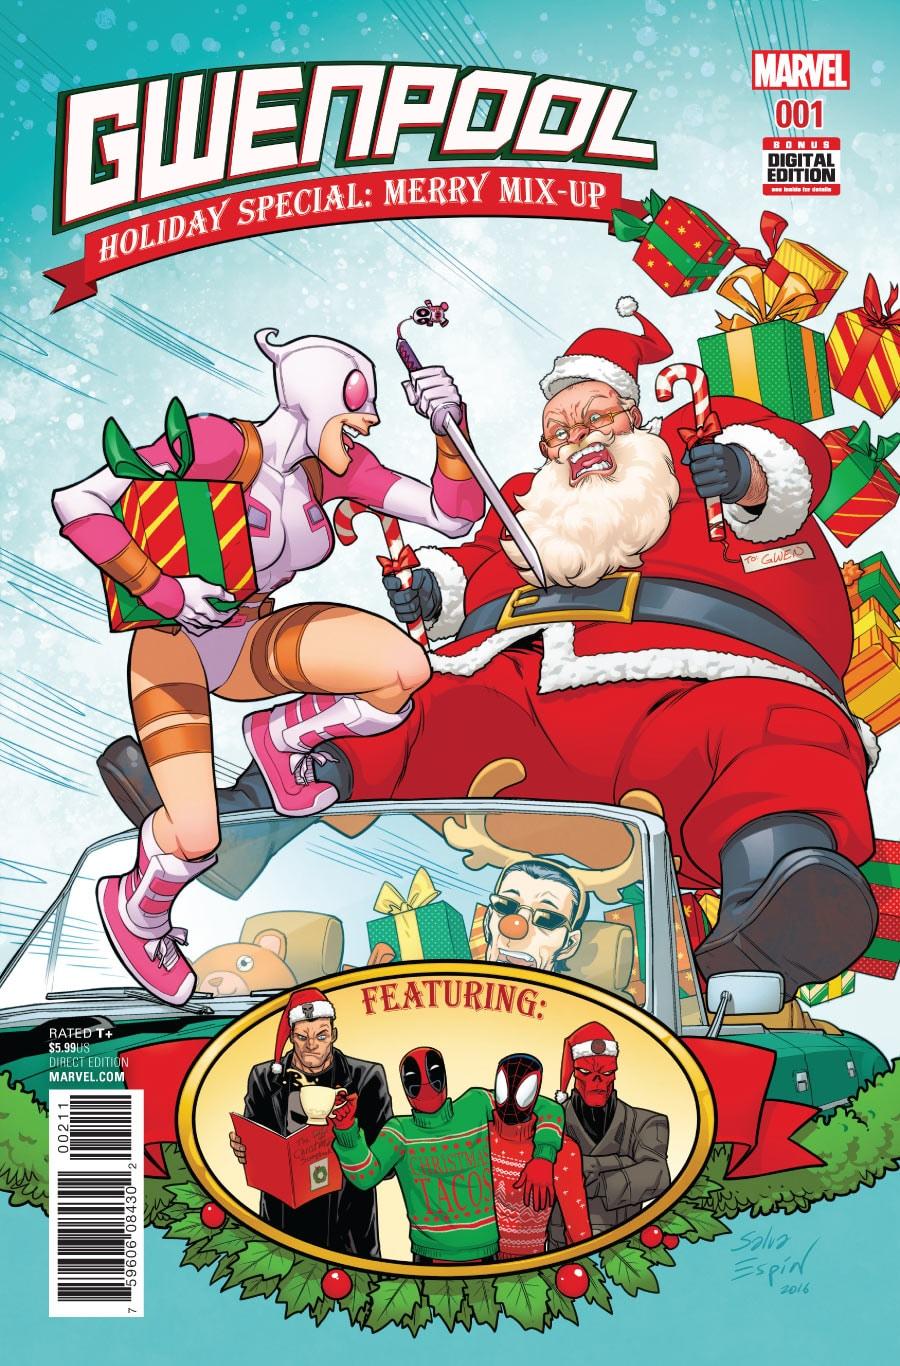 Gwenpool Holiday Special: Merry Mix Up Vol. 1 #1